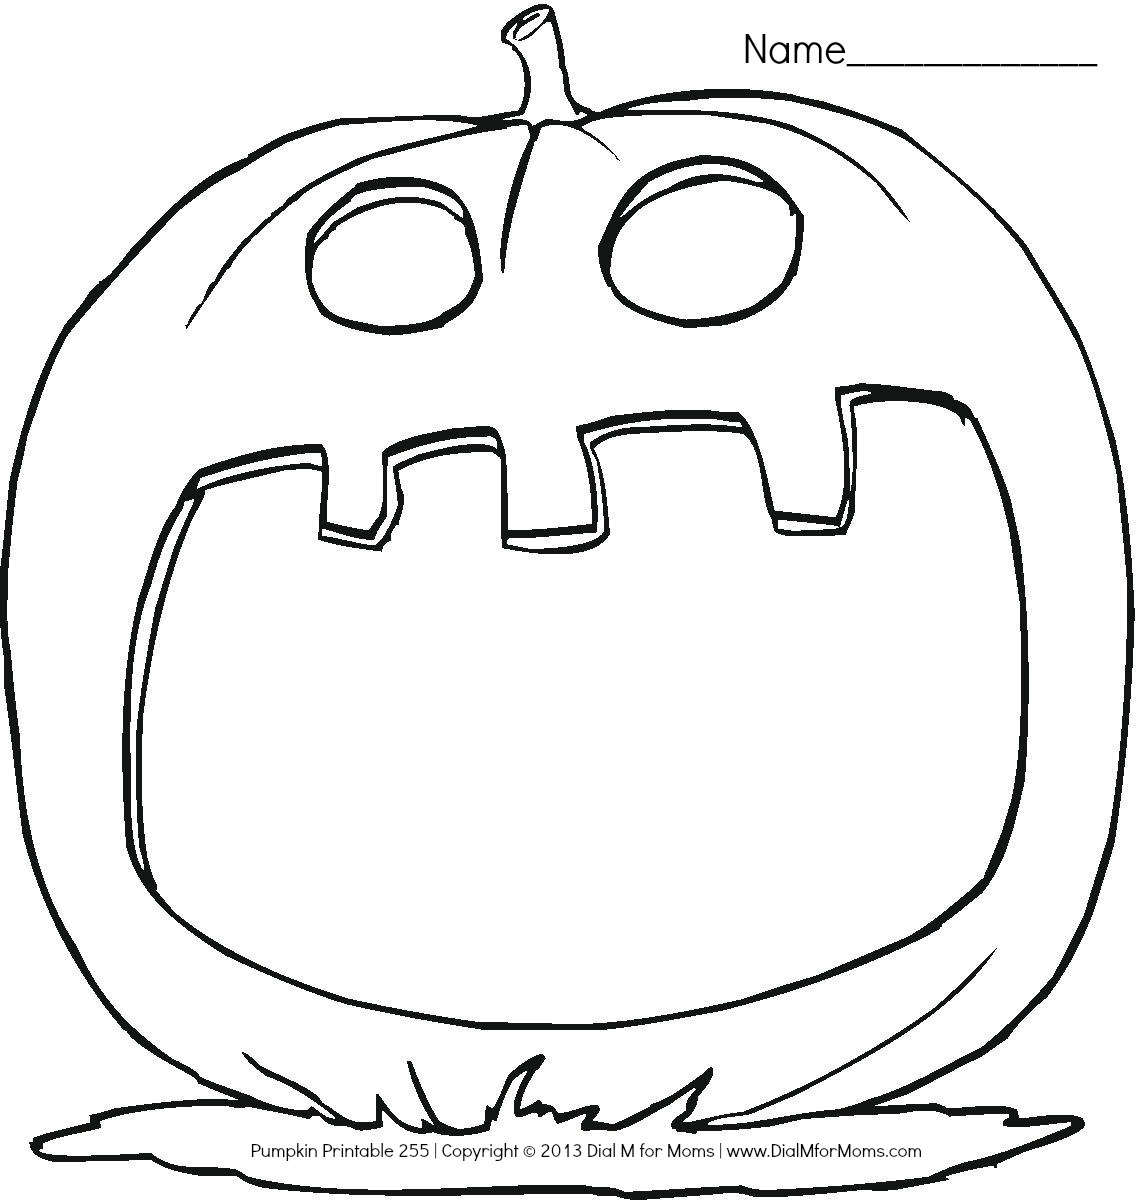 Free printable pumpkin coloring pages - Coloring Pages & Pictures ...